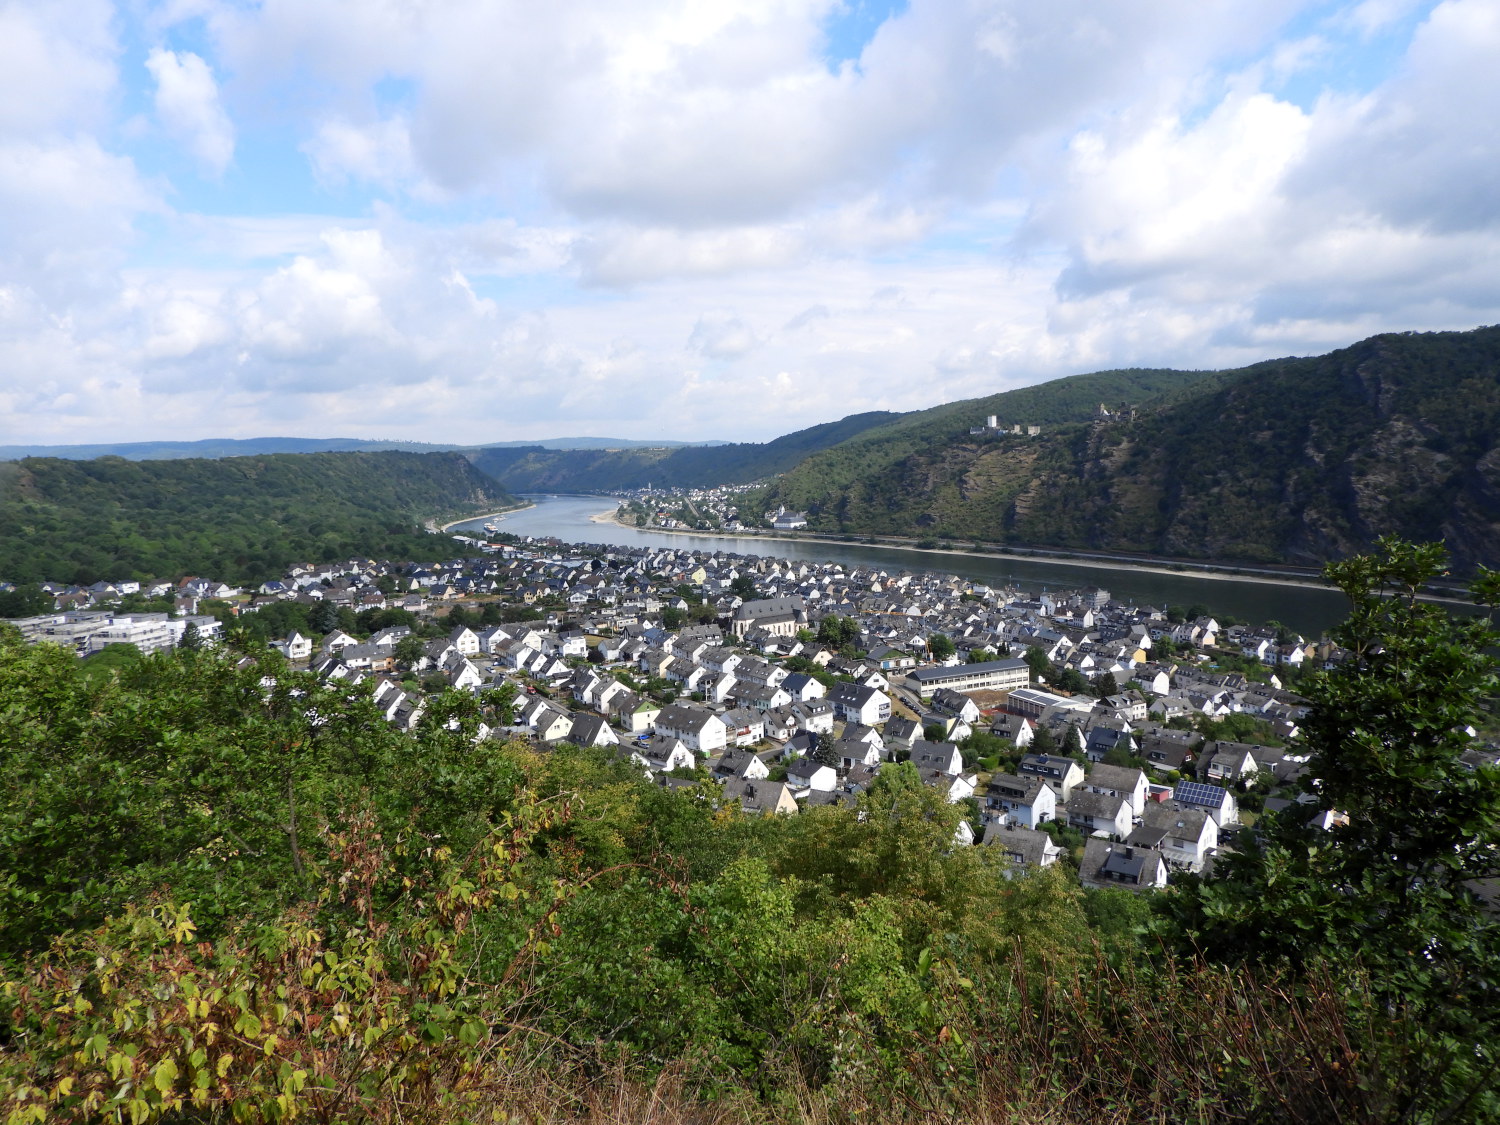 View of Bad Salzig from the viewpoint at Taunusblick